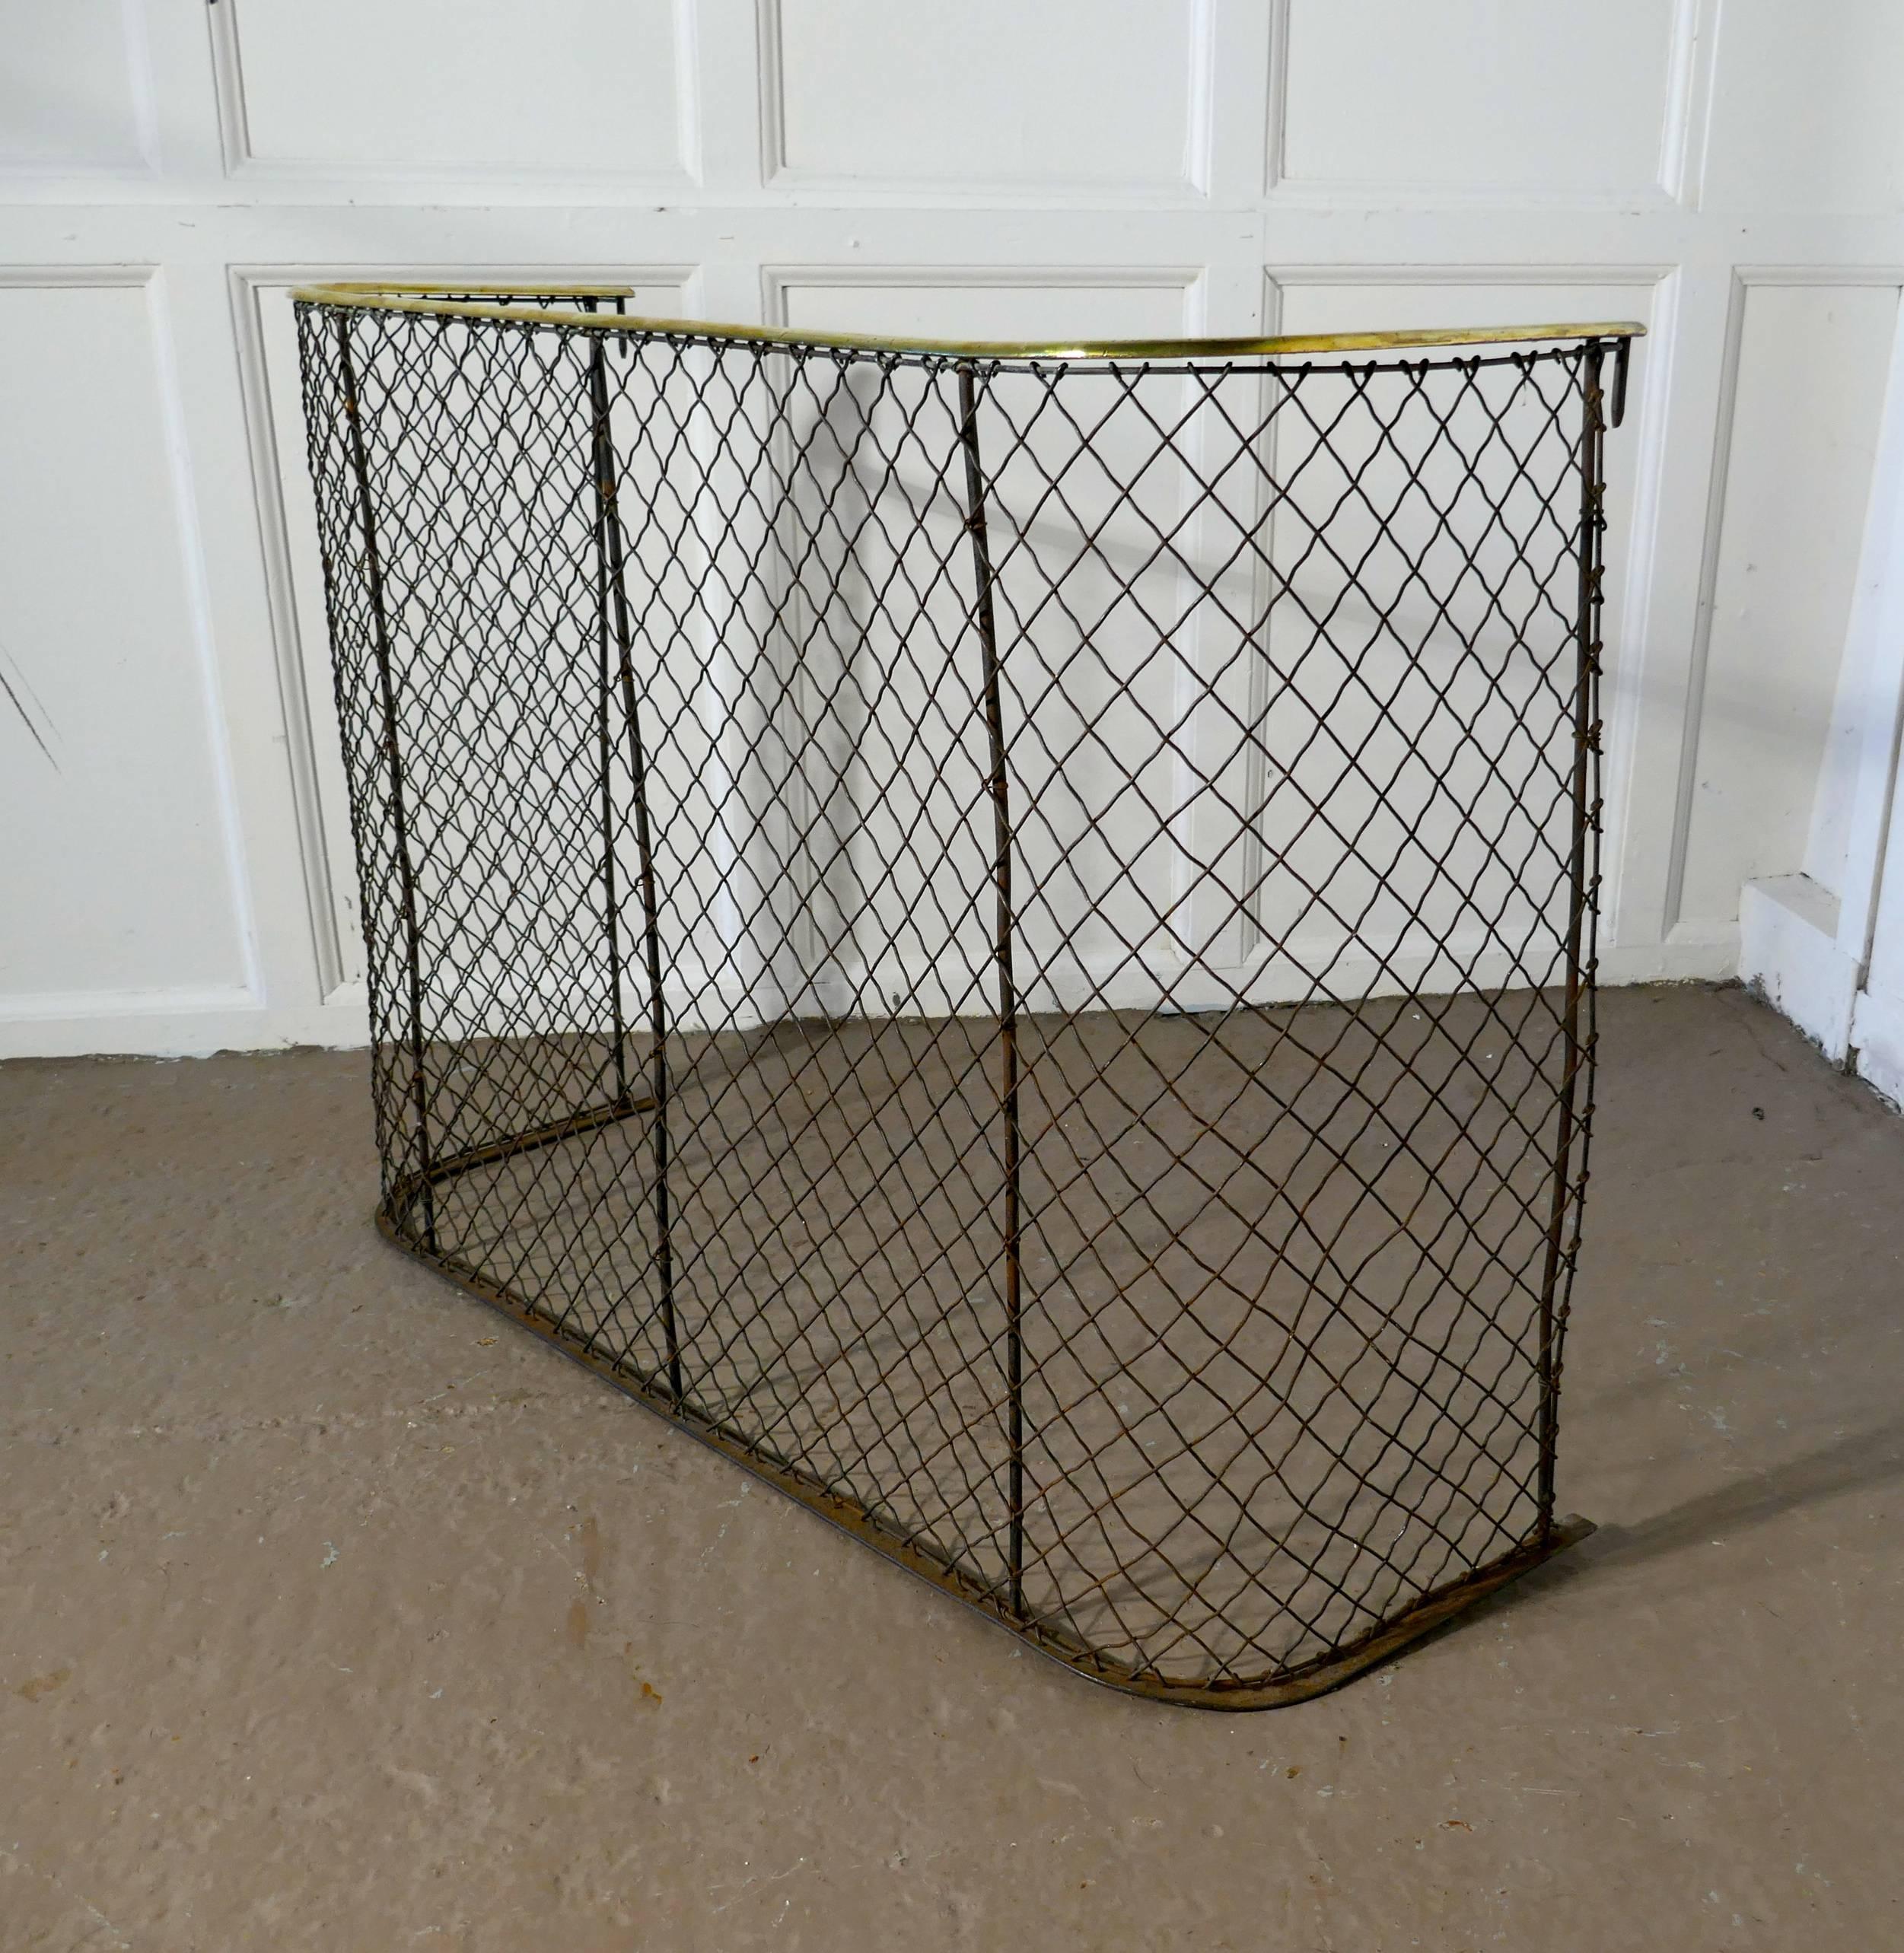 A Victorian nursery fire guard, brass fender

A high Victorian antique fire guard often known as a nursery guard as it completely surrounds the fire 
The slightly curved brass topped rail is in very good order as is the wire chain mesh 
Measure: